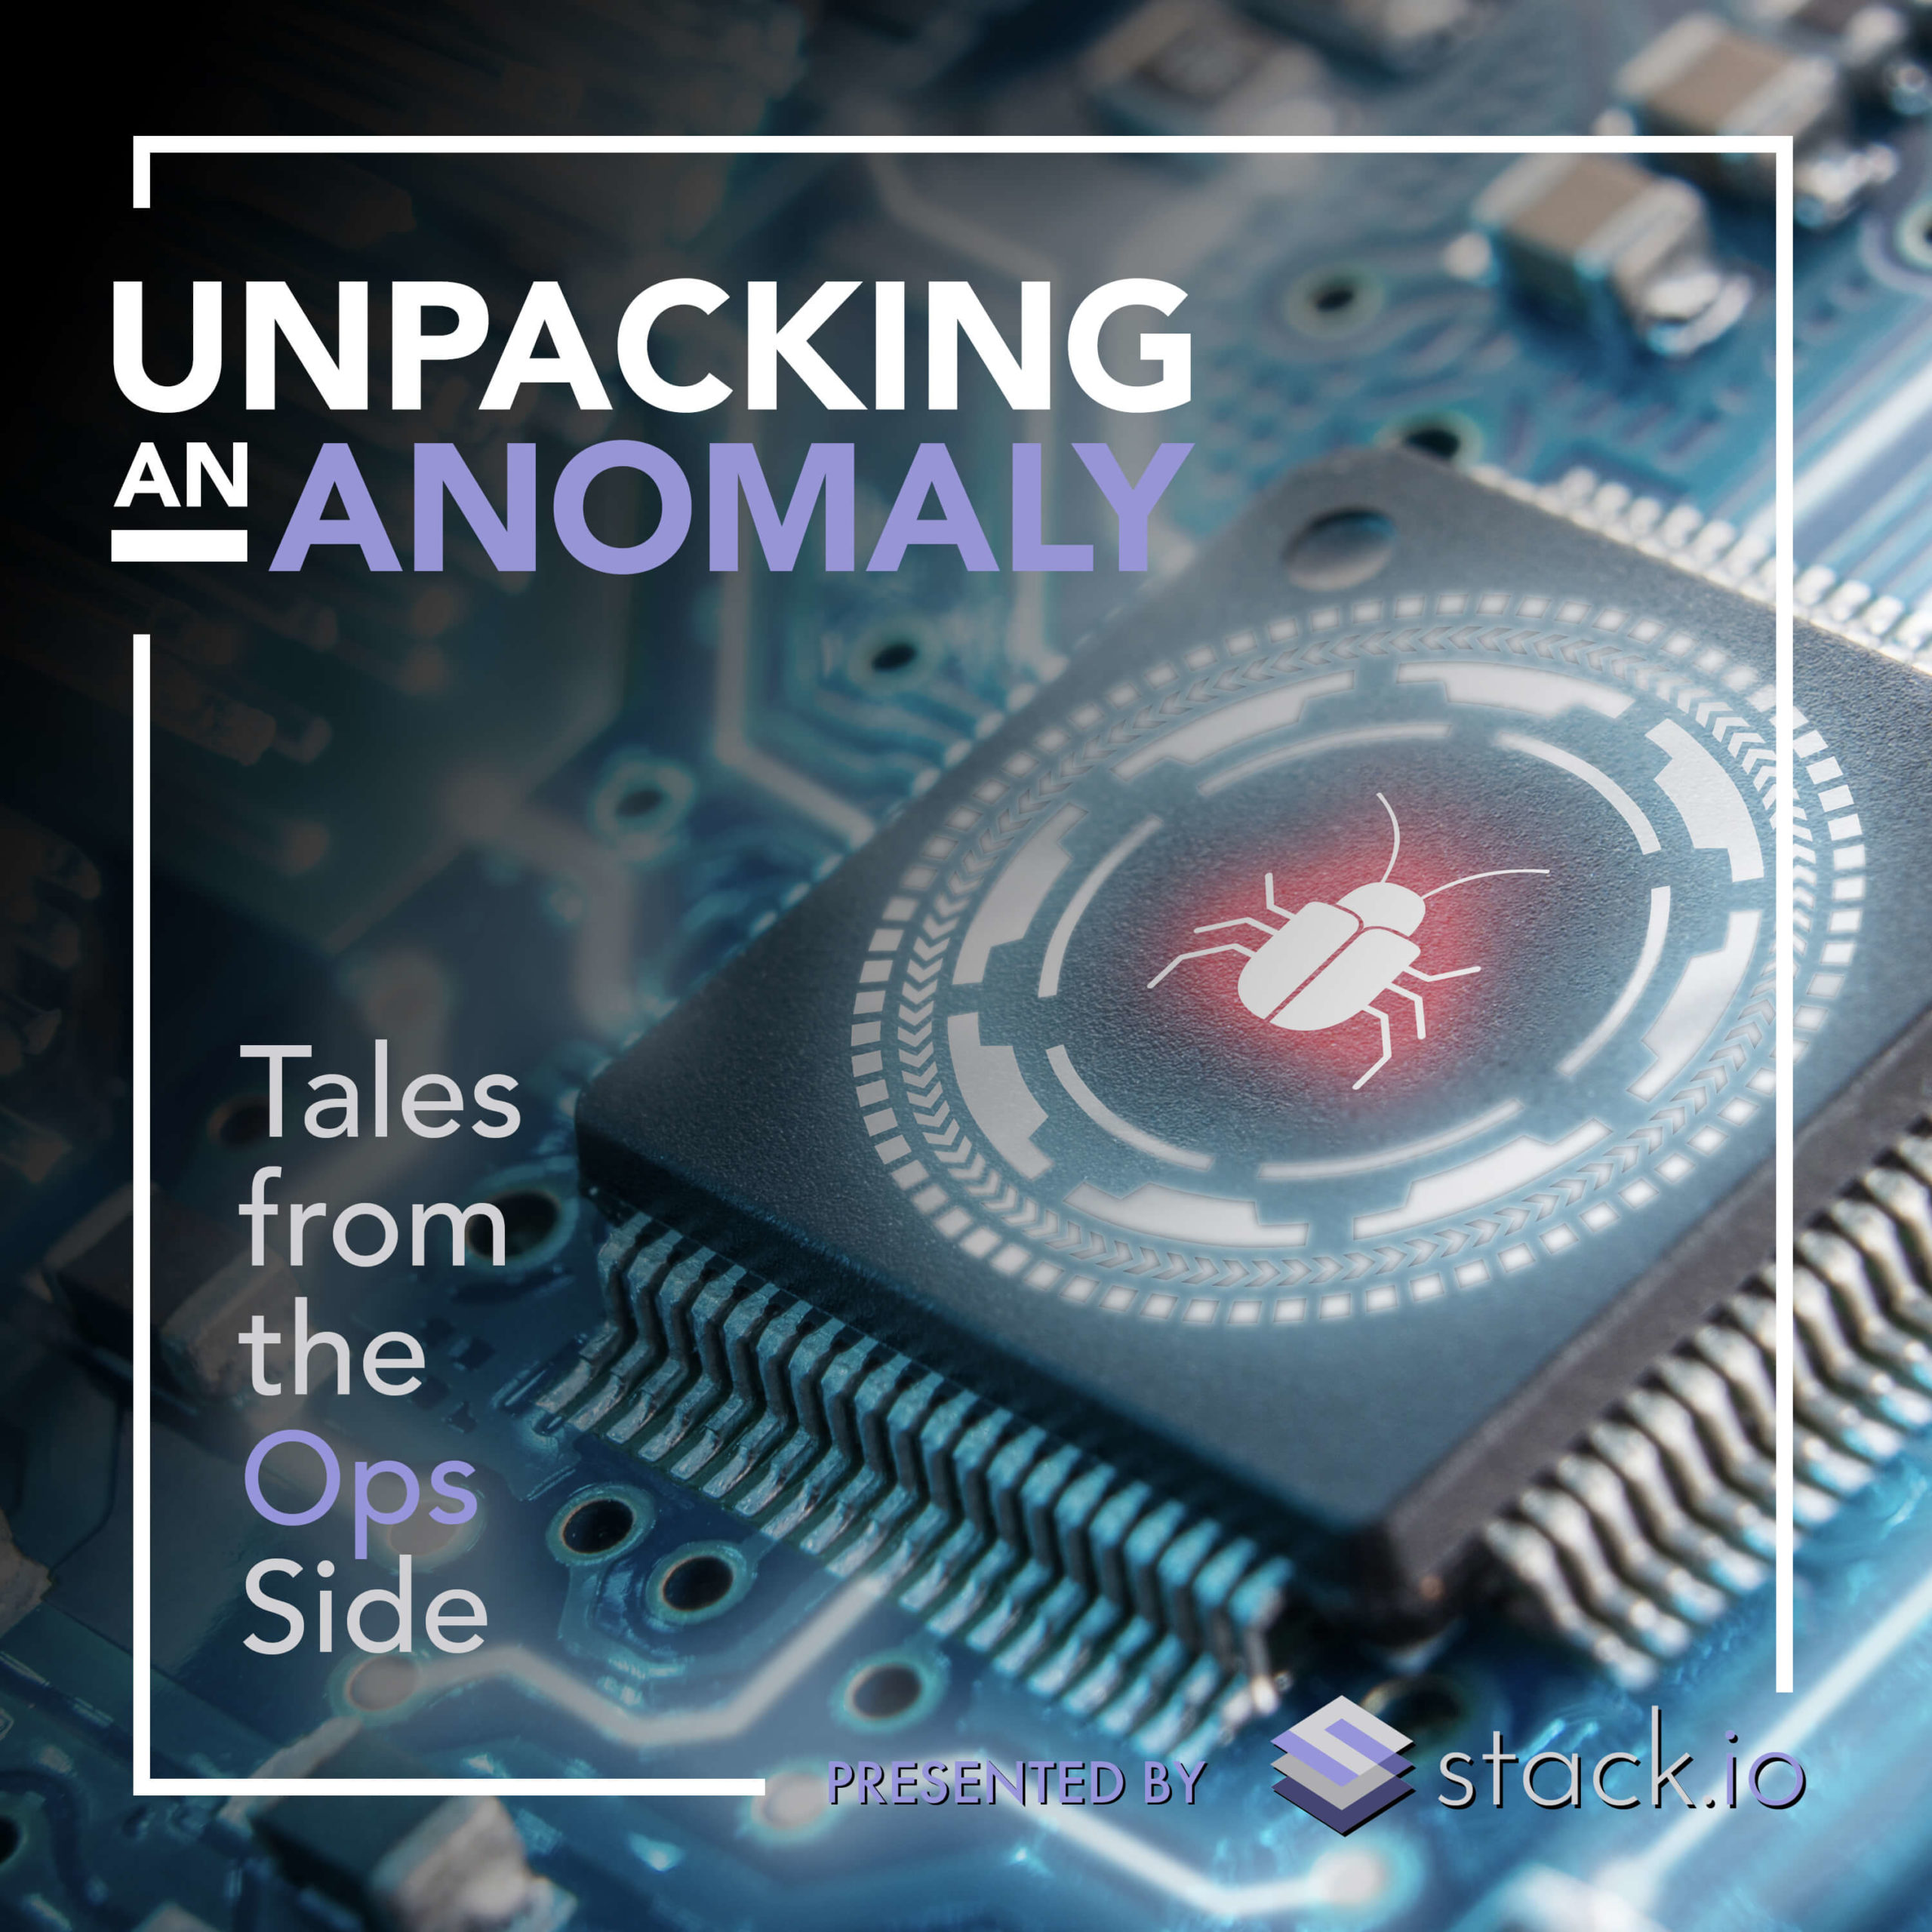 Tales from the Ops Side - Episode 05 - Unpacking an Anomaly